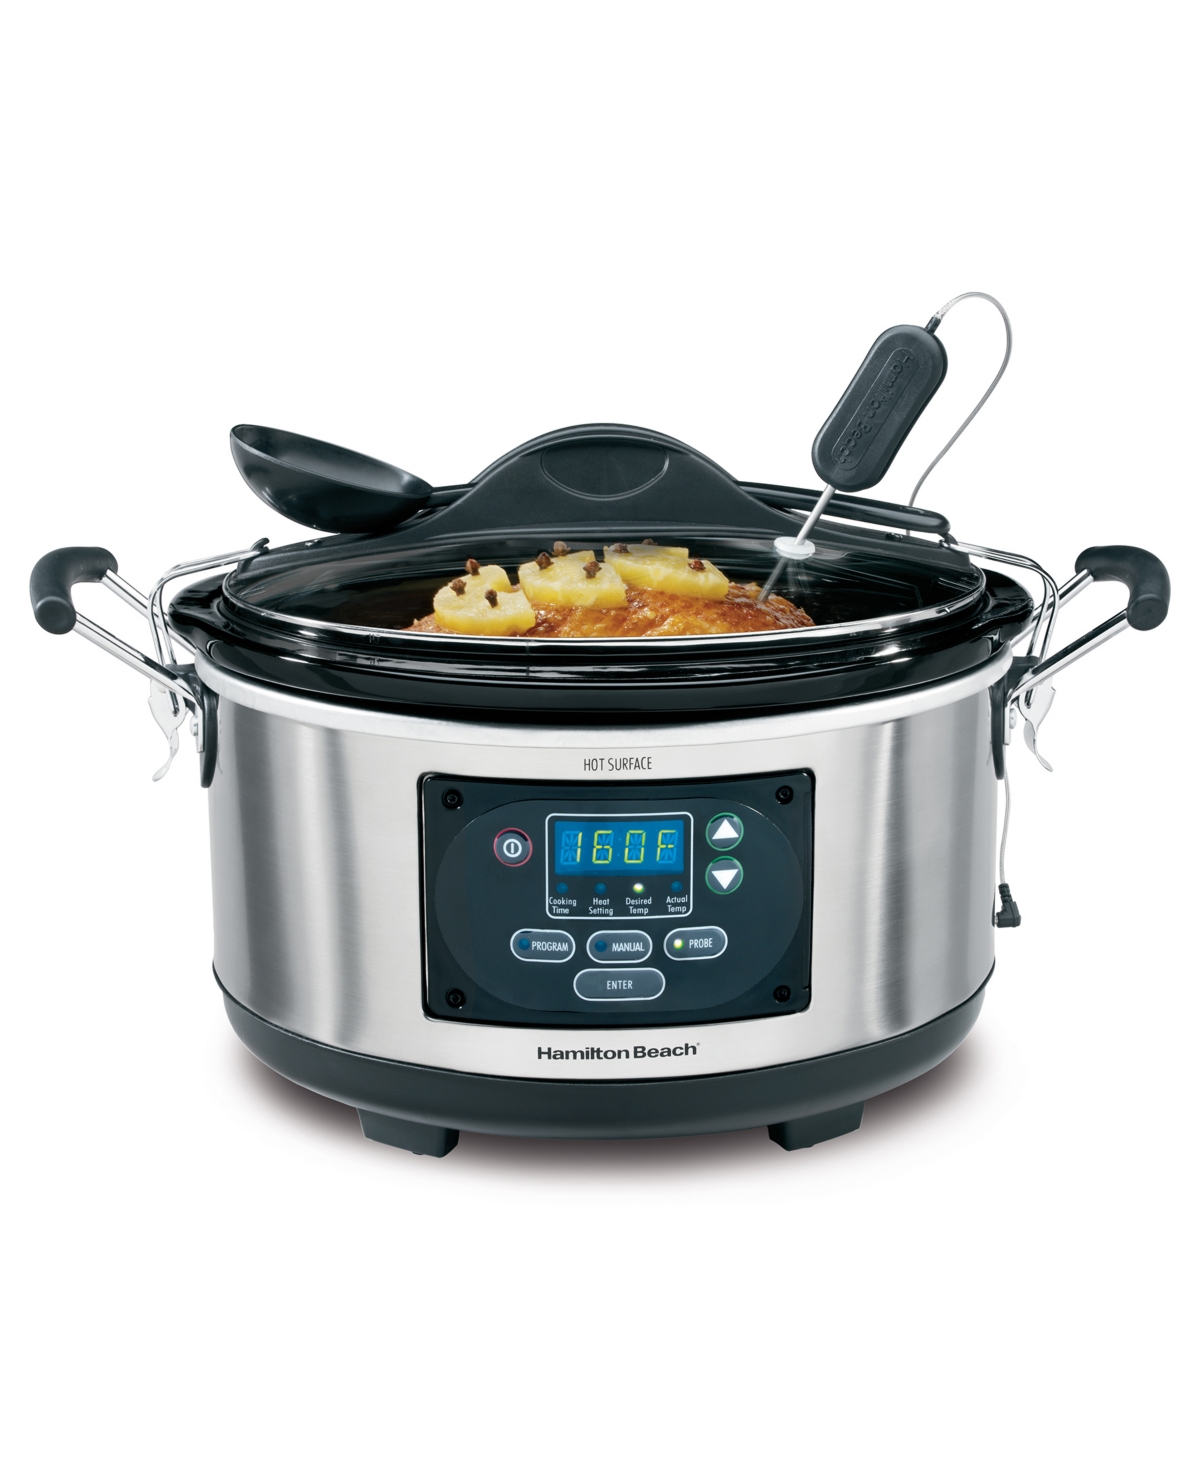 Hamilton Beach's slow cooker and dip warmer set is $18 off at